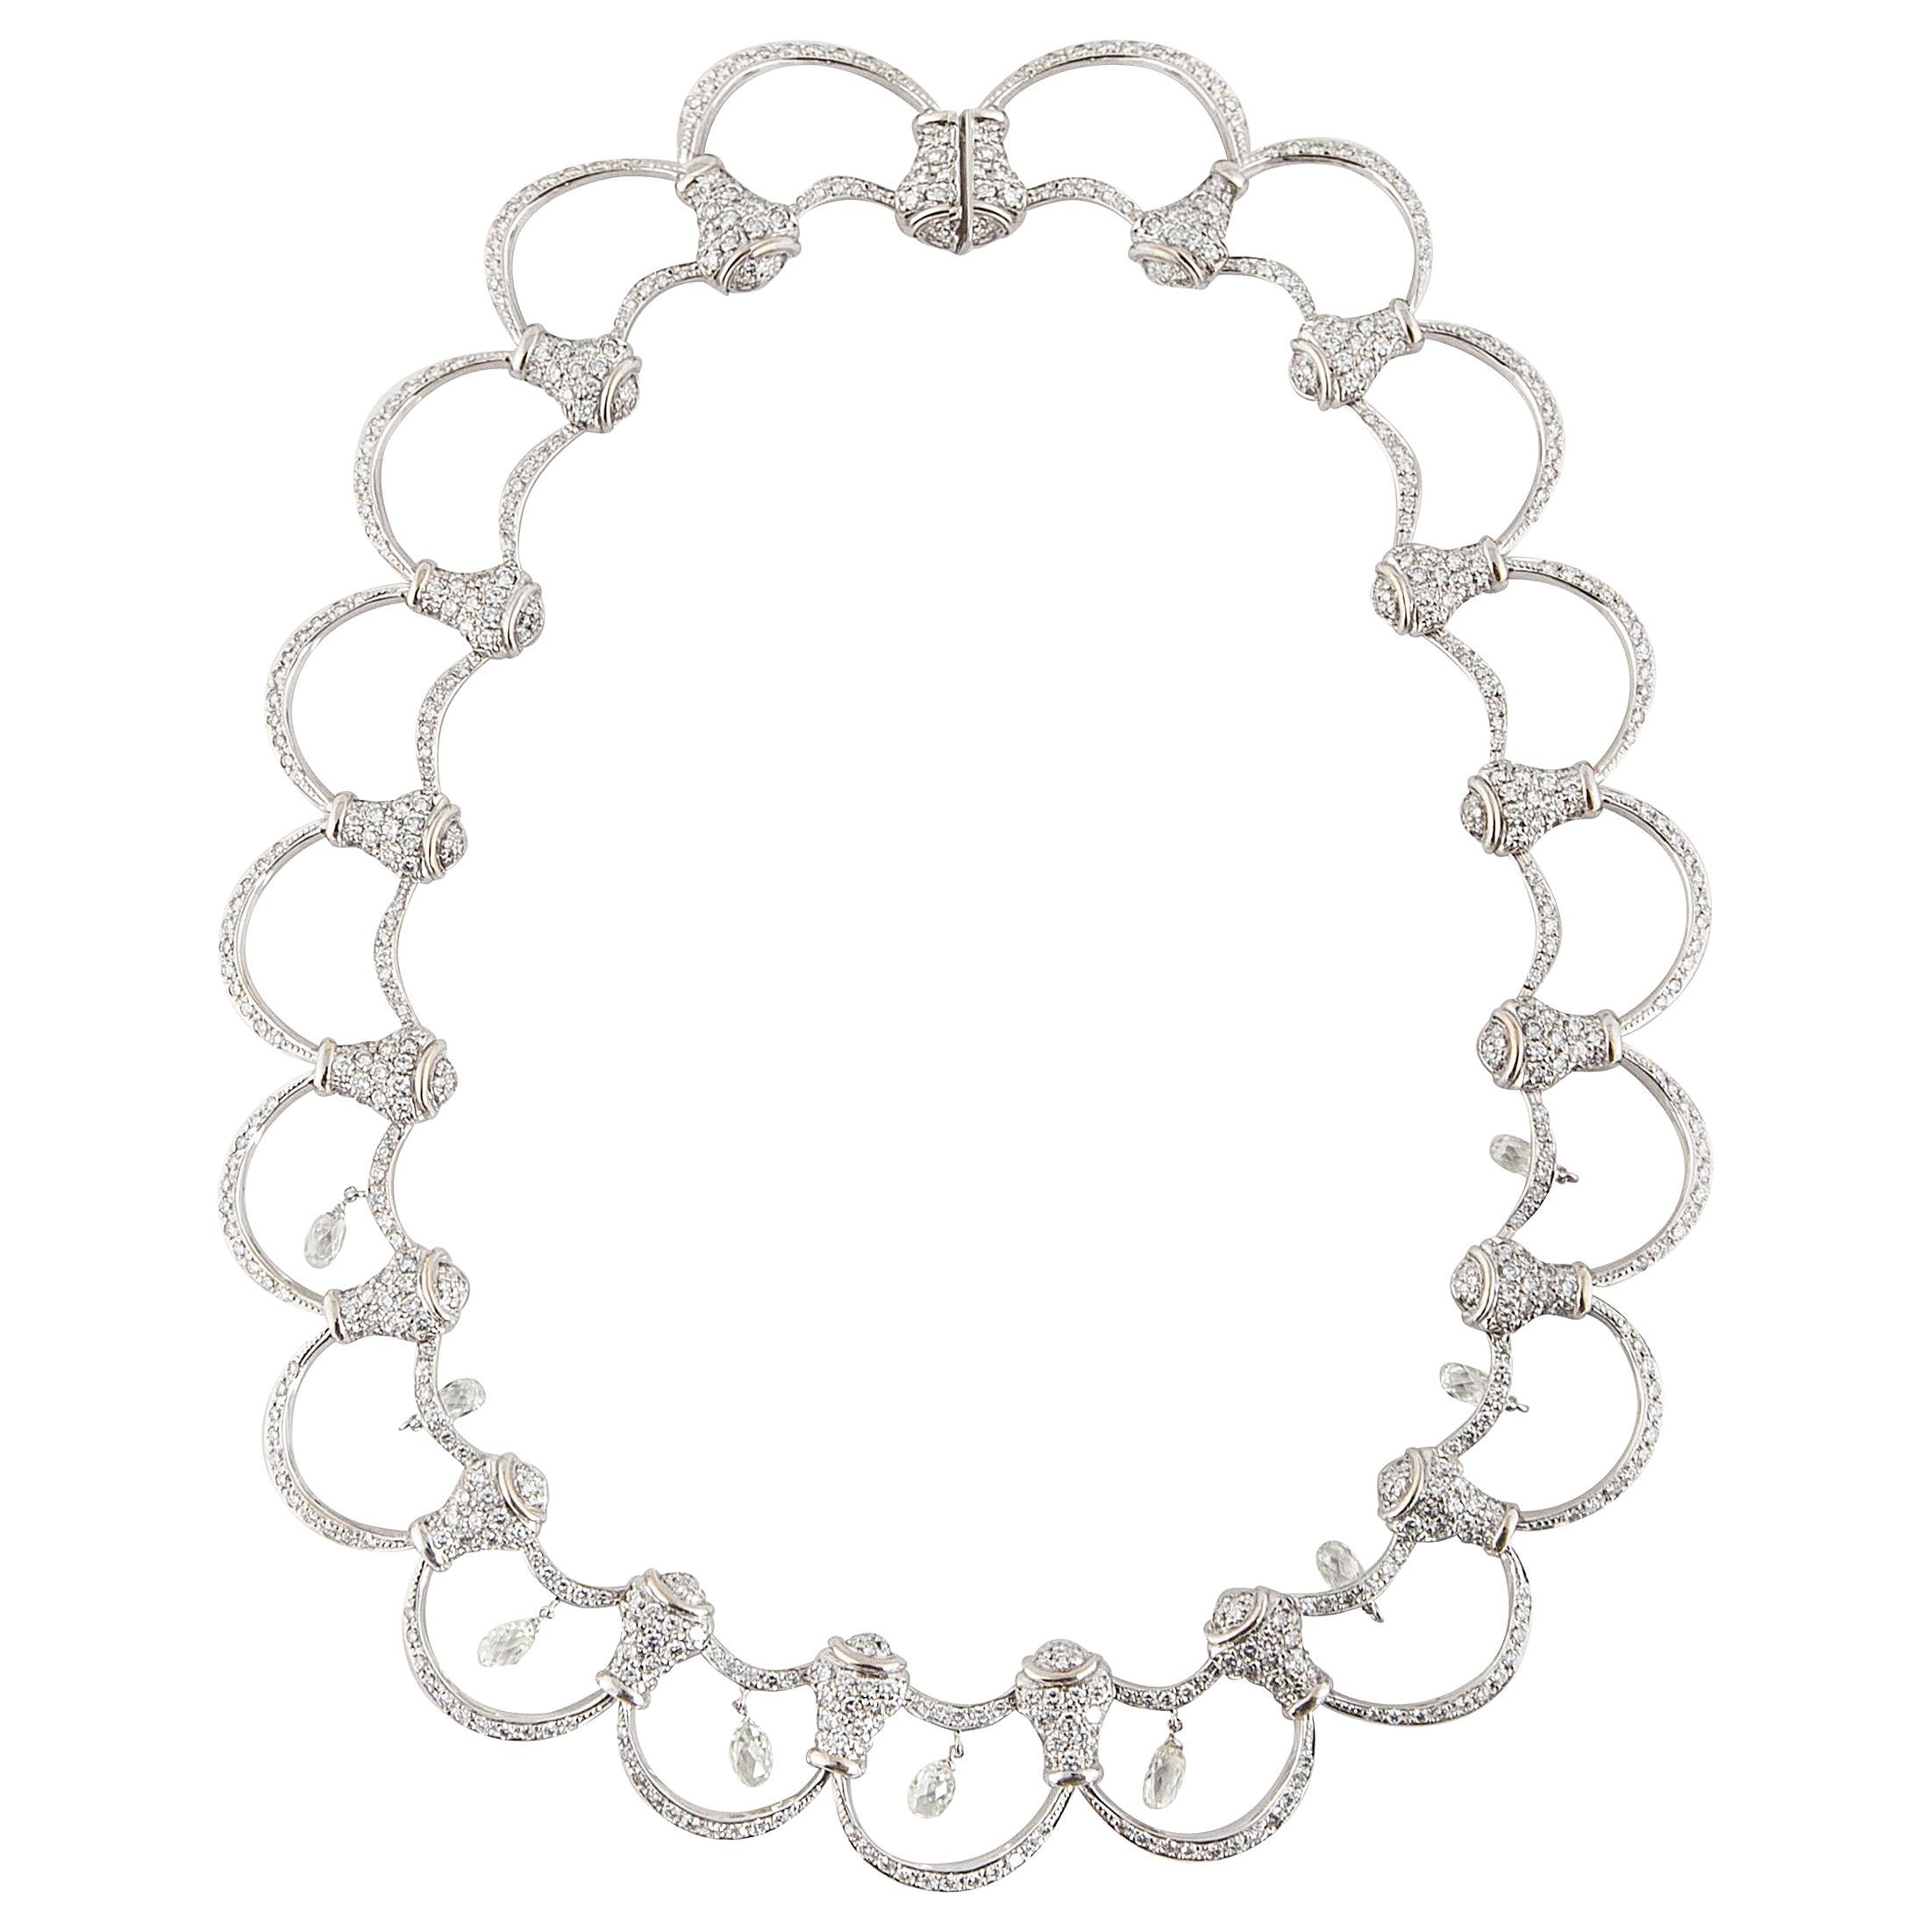 18K White Gold Diamond Collar Necklace with Briolettes